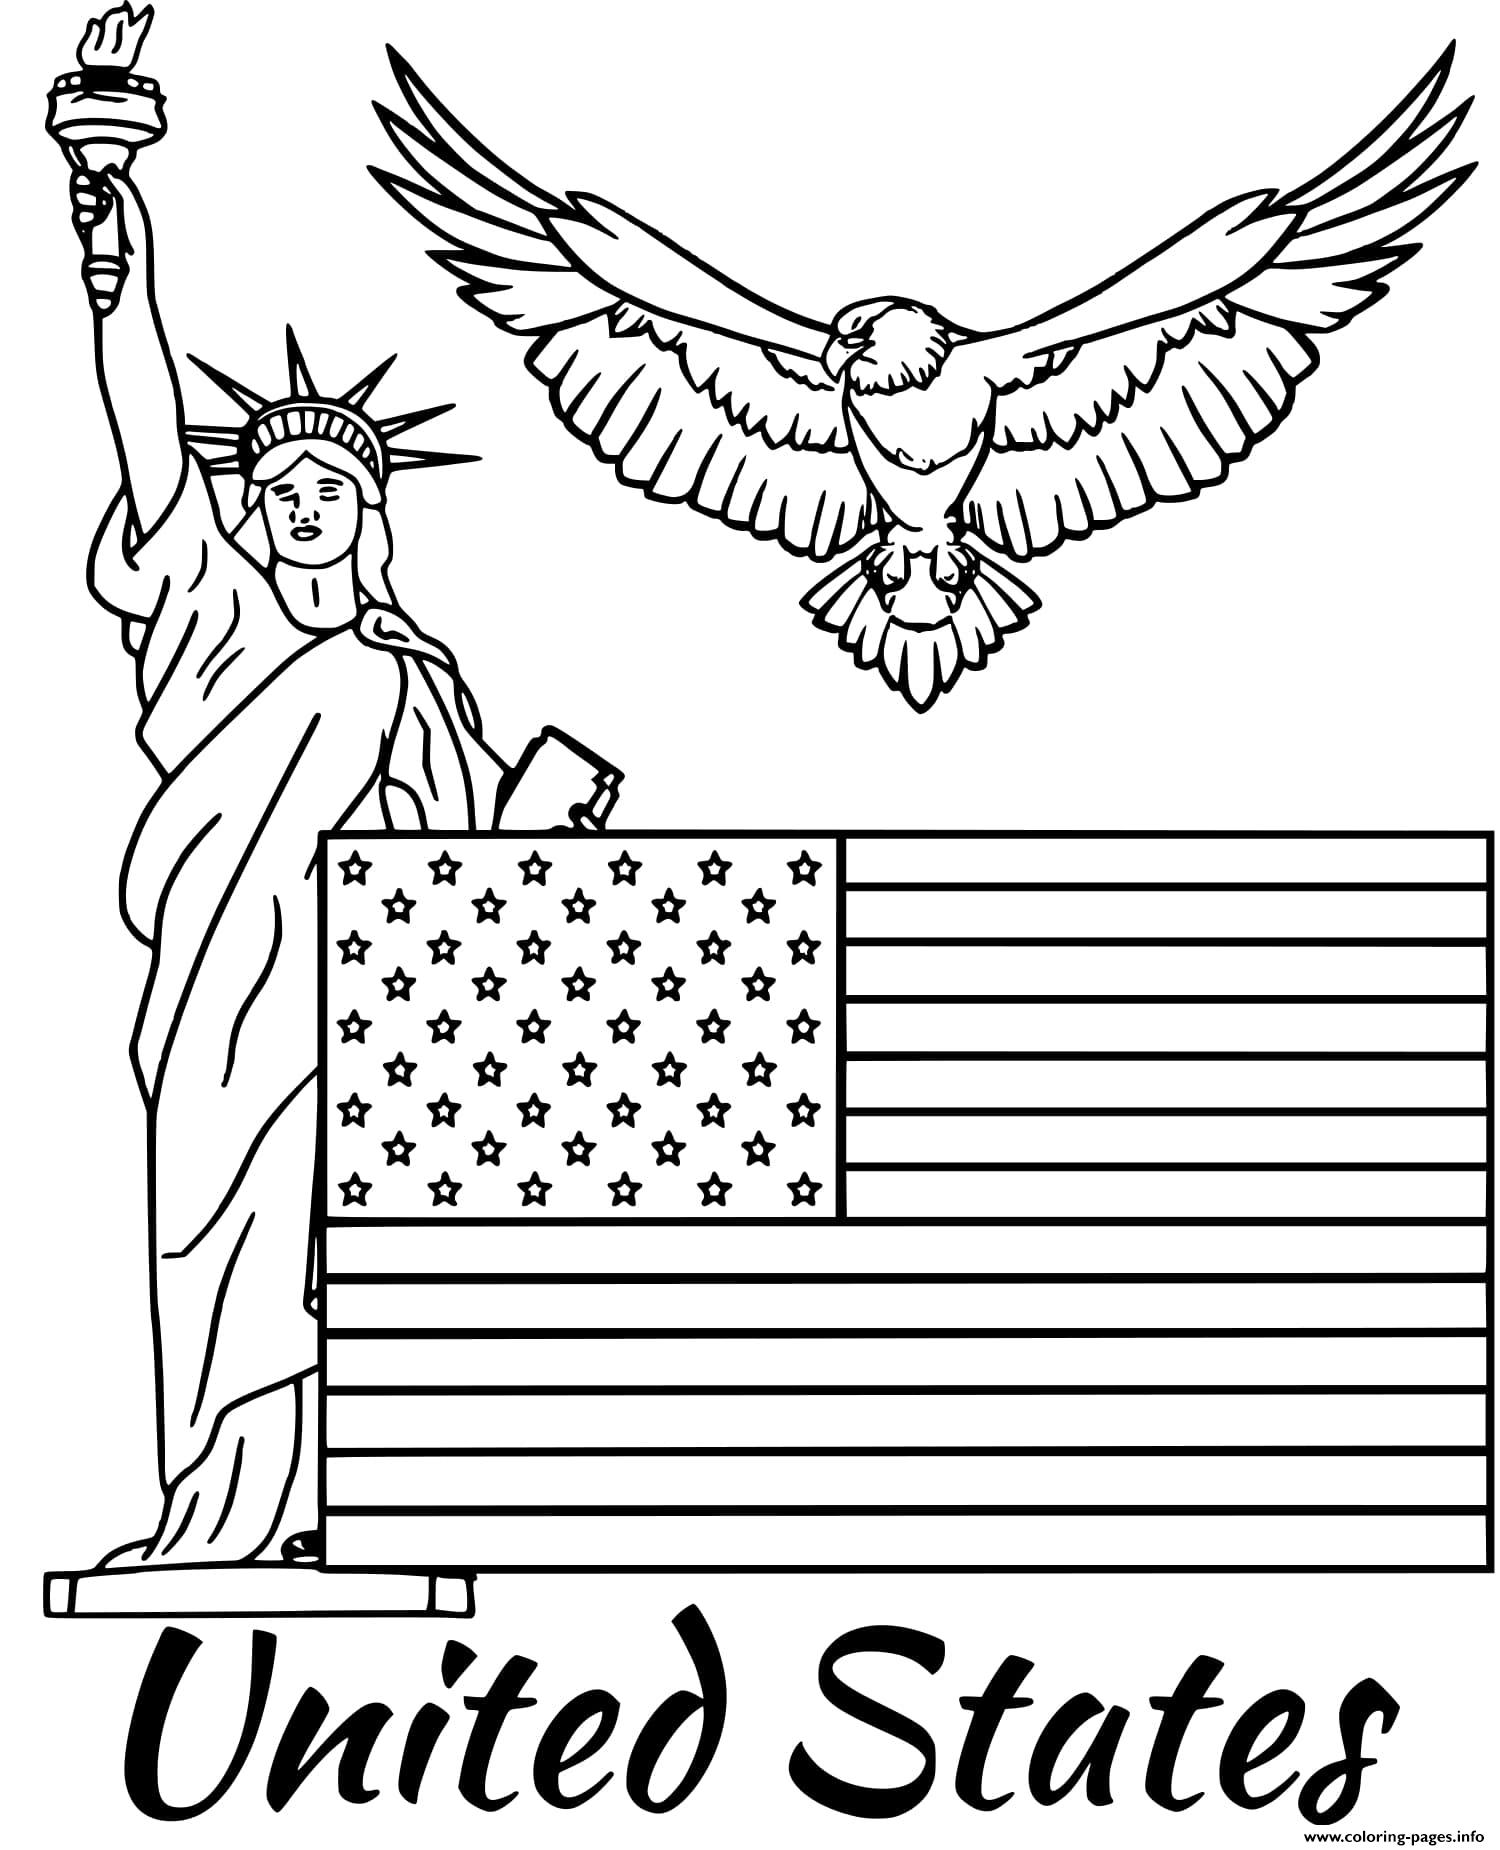 United States Flag Coloring Pages Printable1500 x 1850